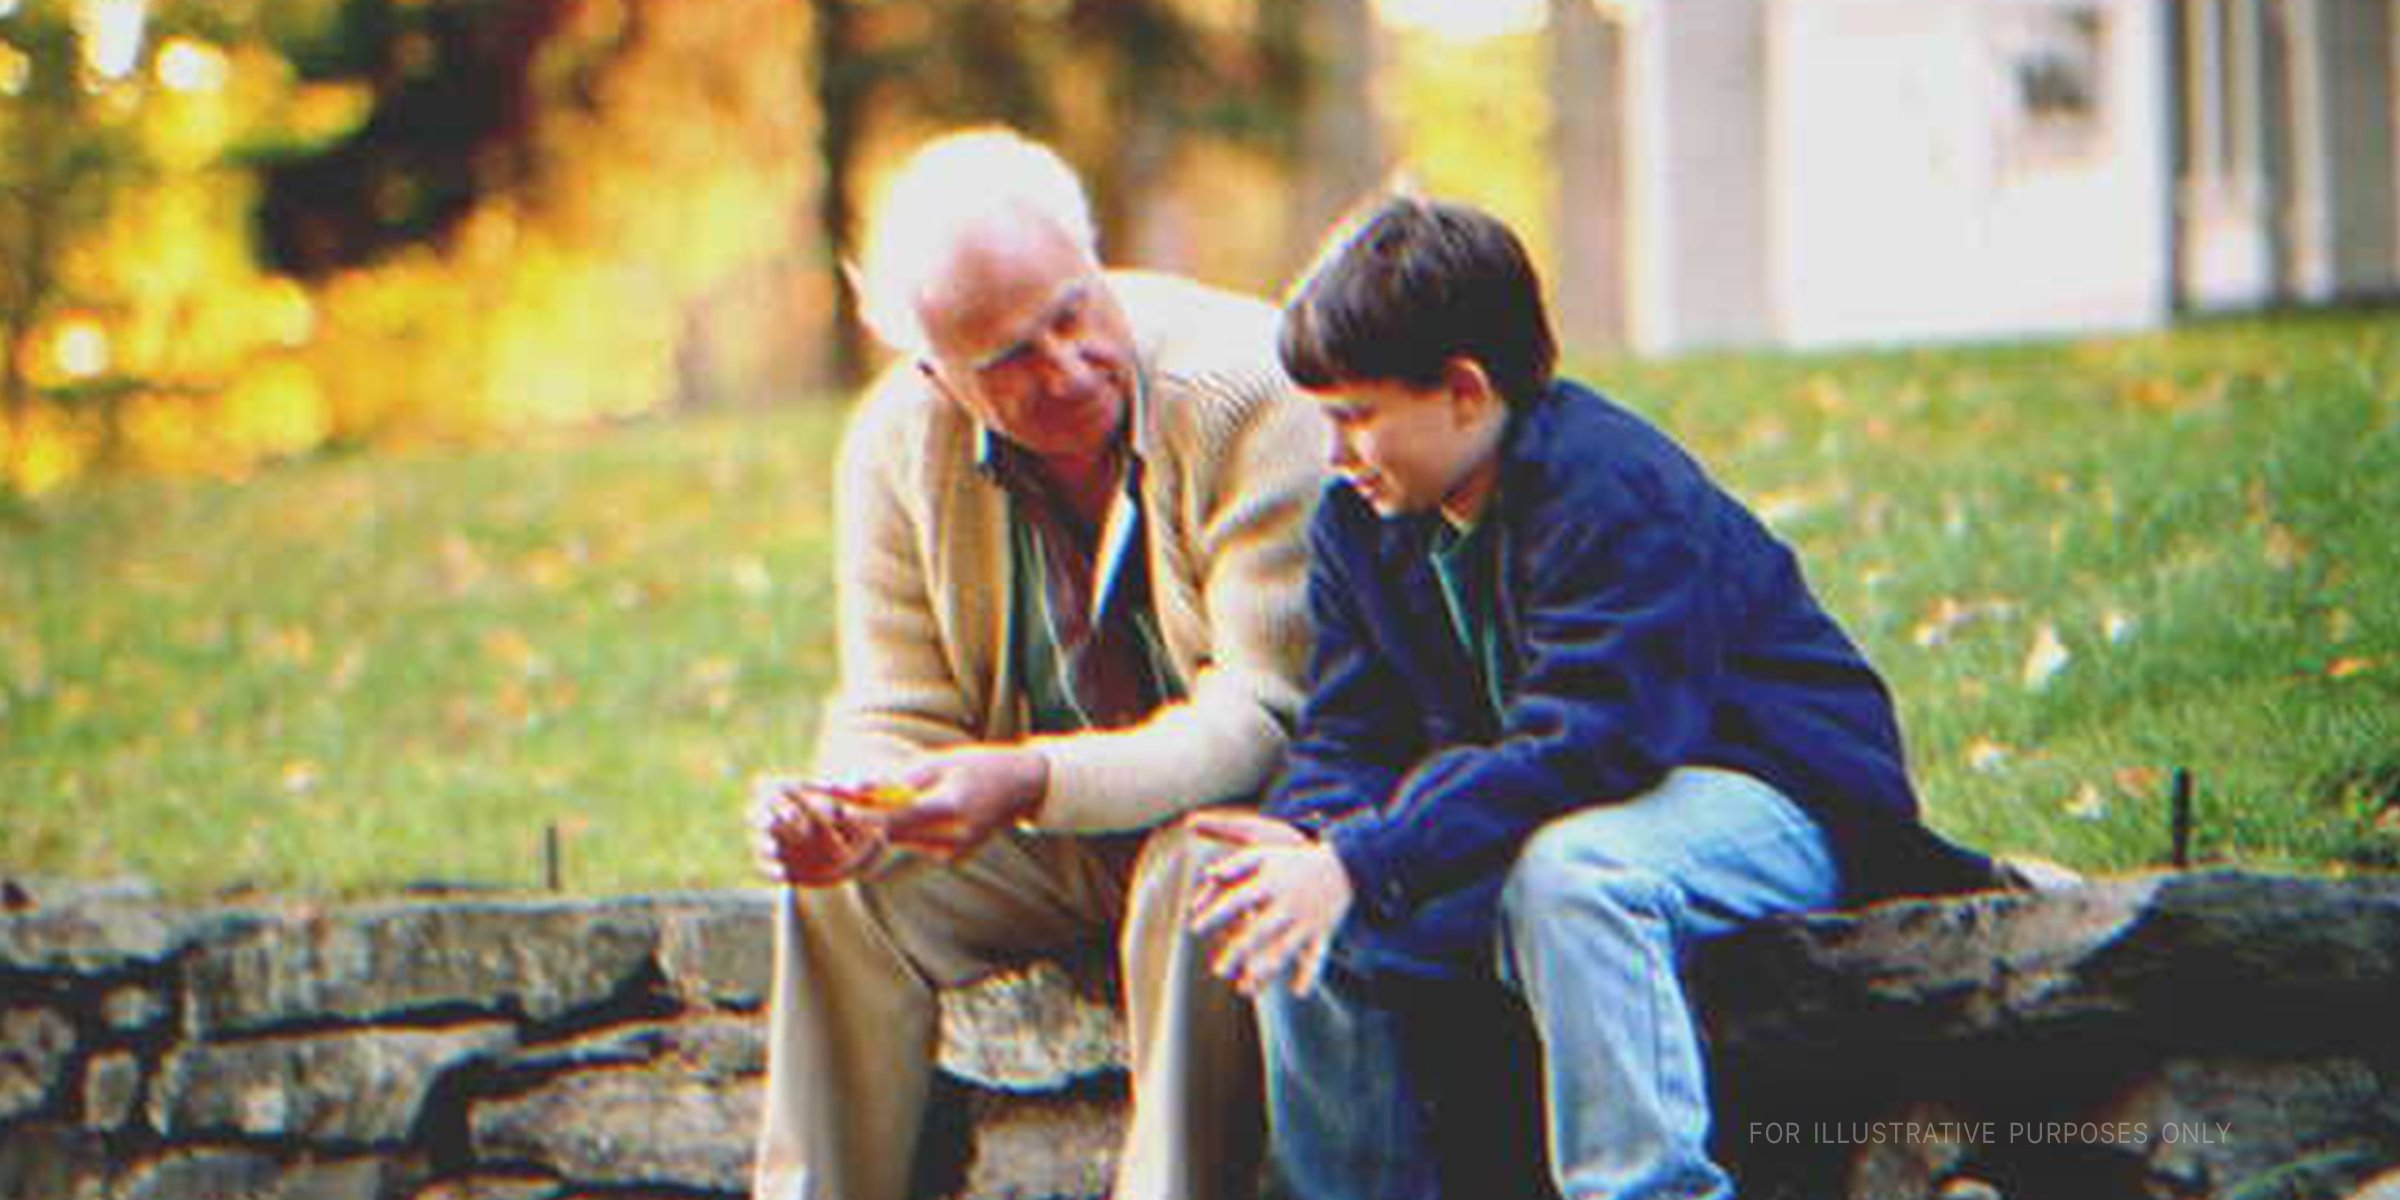 Elderly man and boy in a park | Getty Images